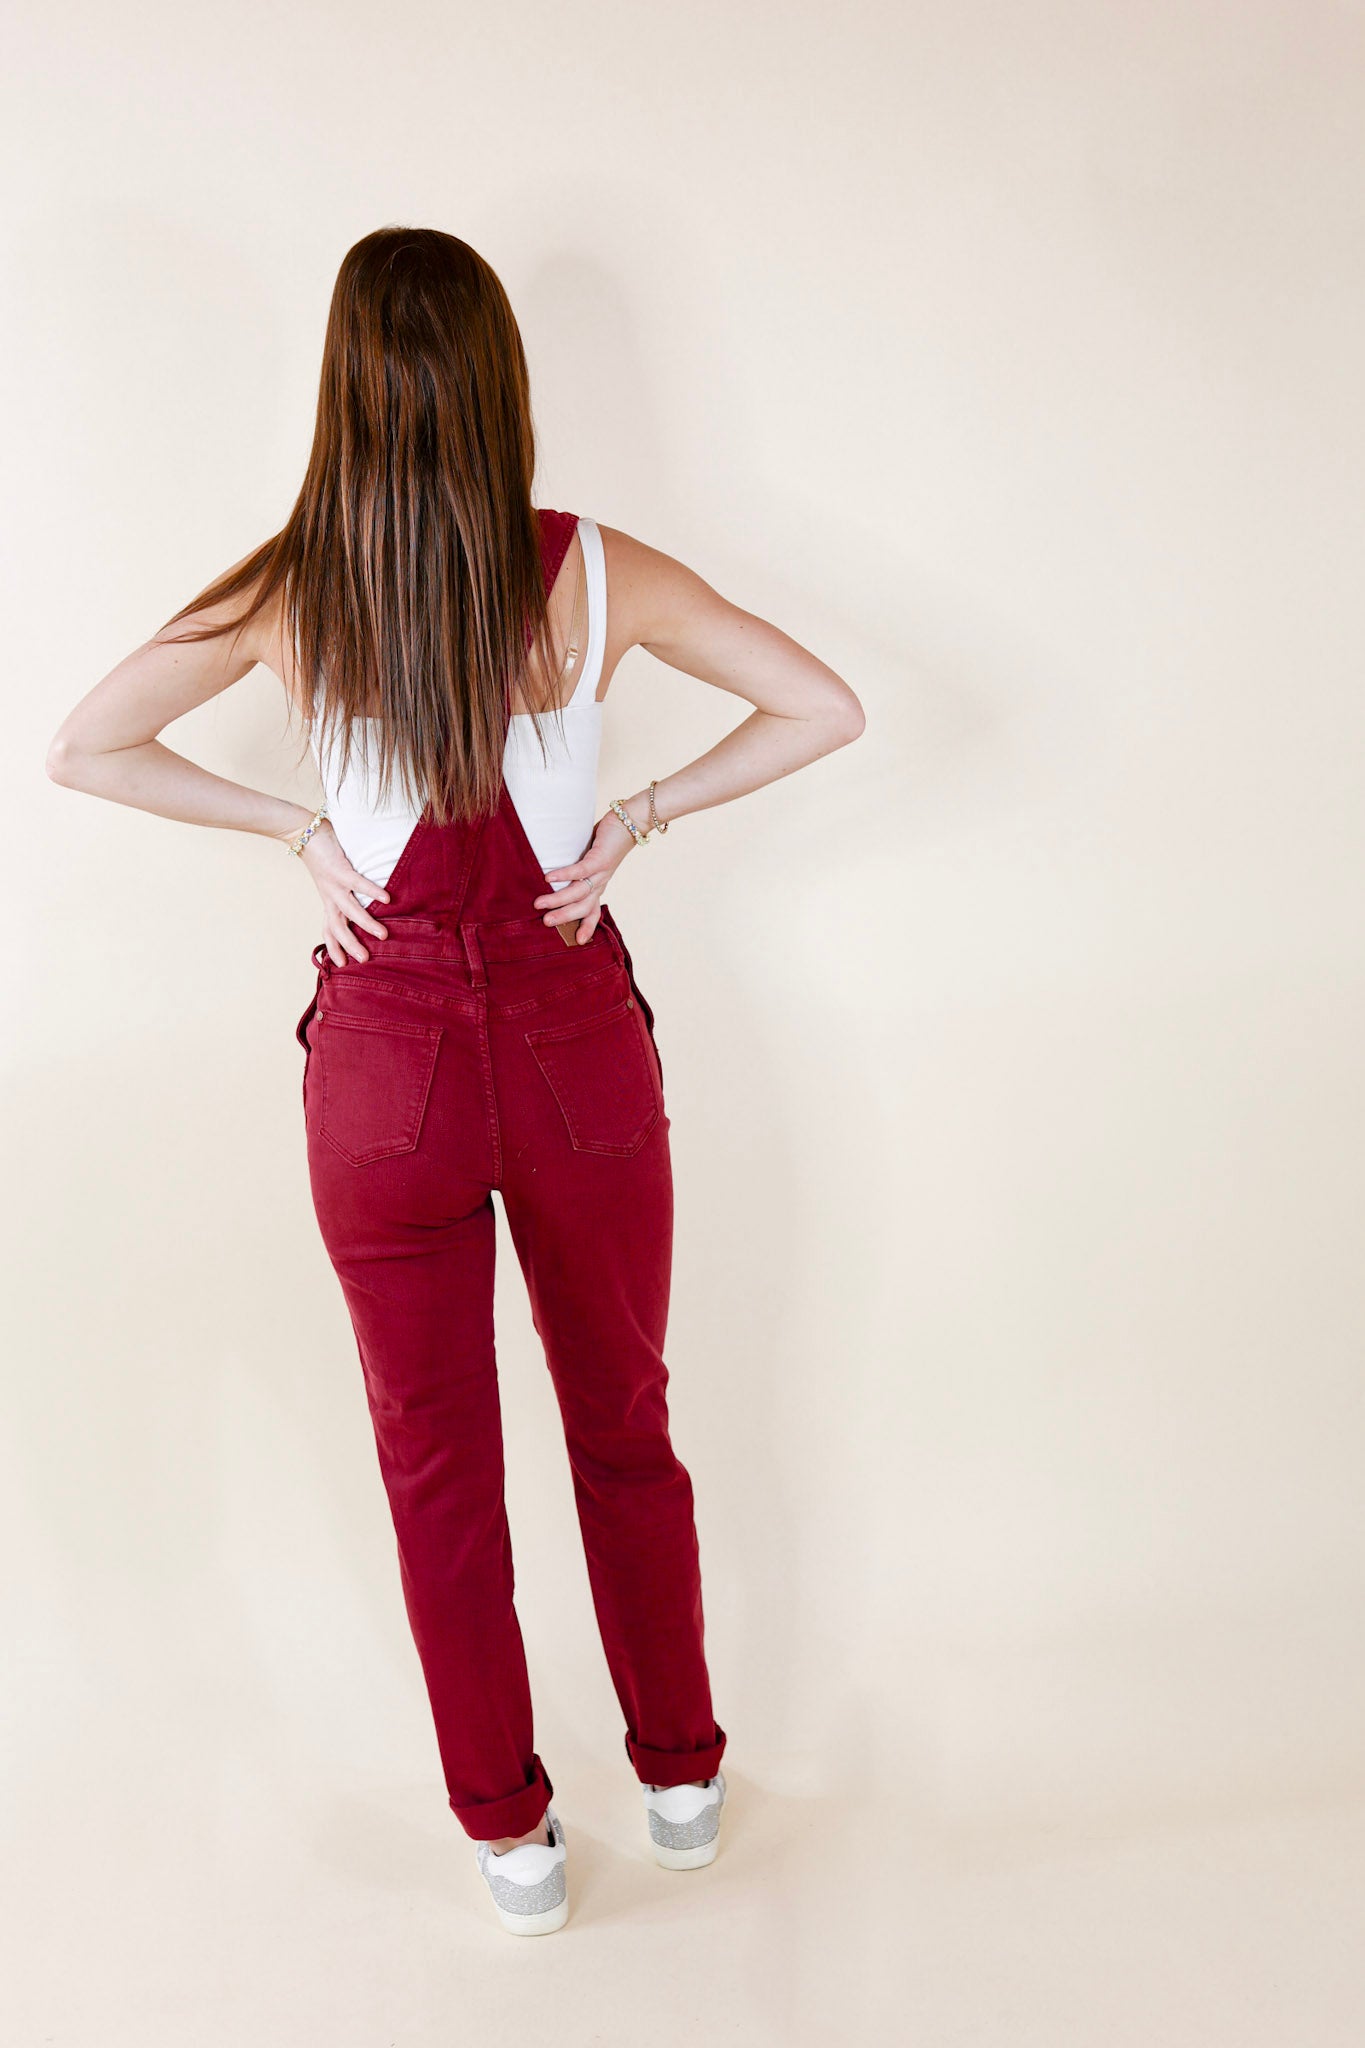 Judy Blue | Start The Bonfire Denim Garment Dyed Overalls in Maroon - Giddy Up Glamour Boutique